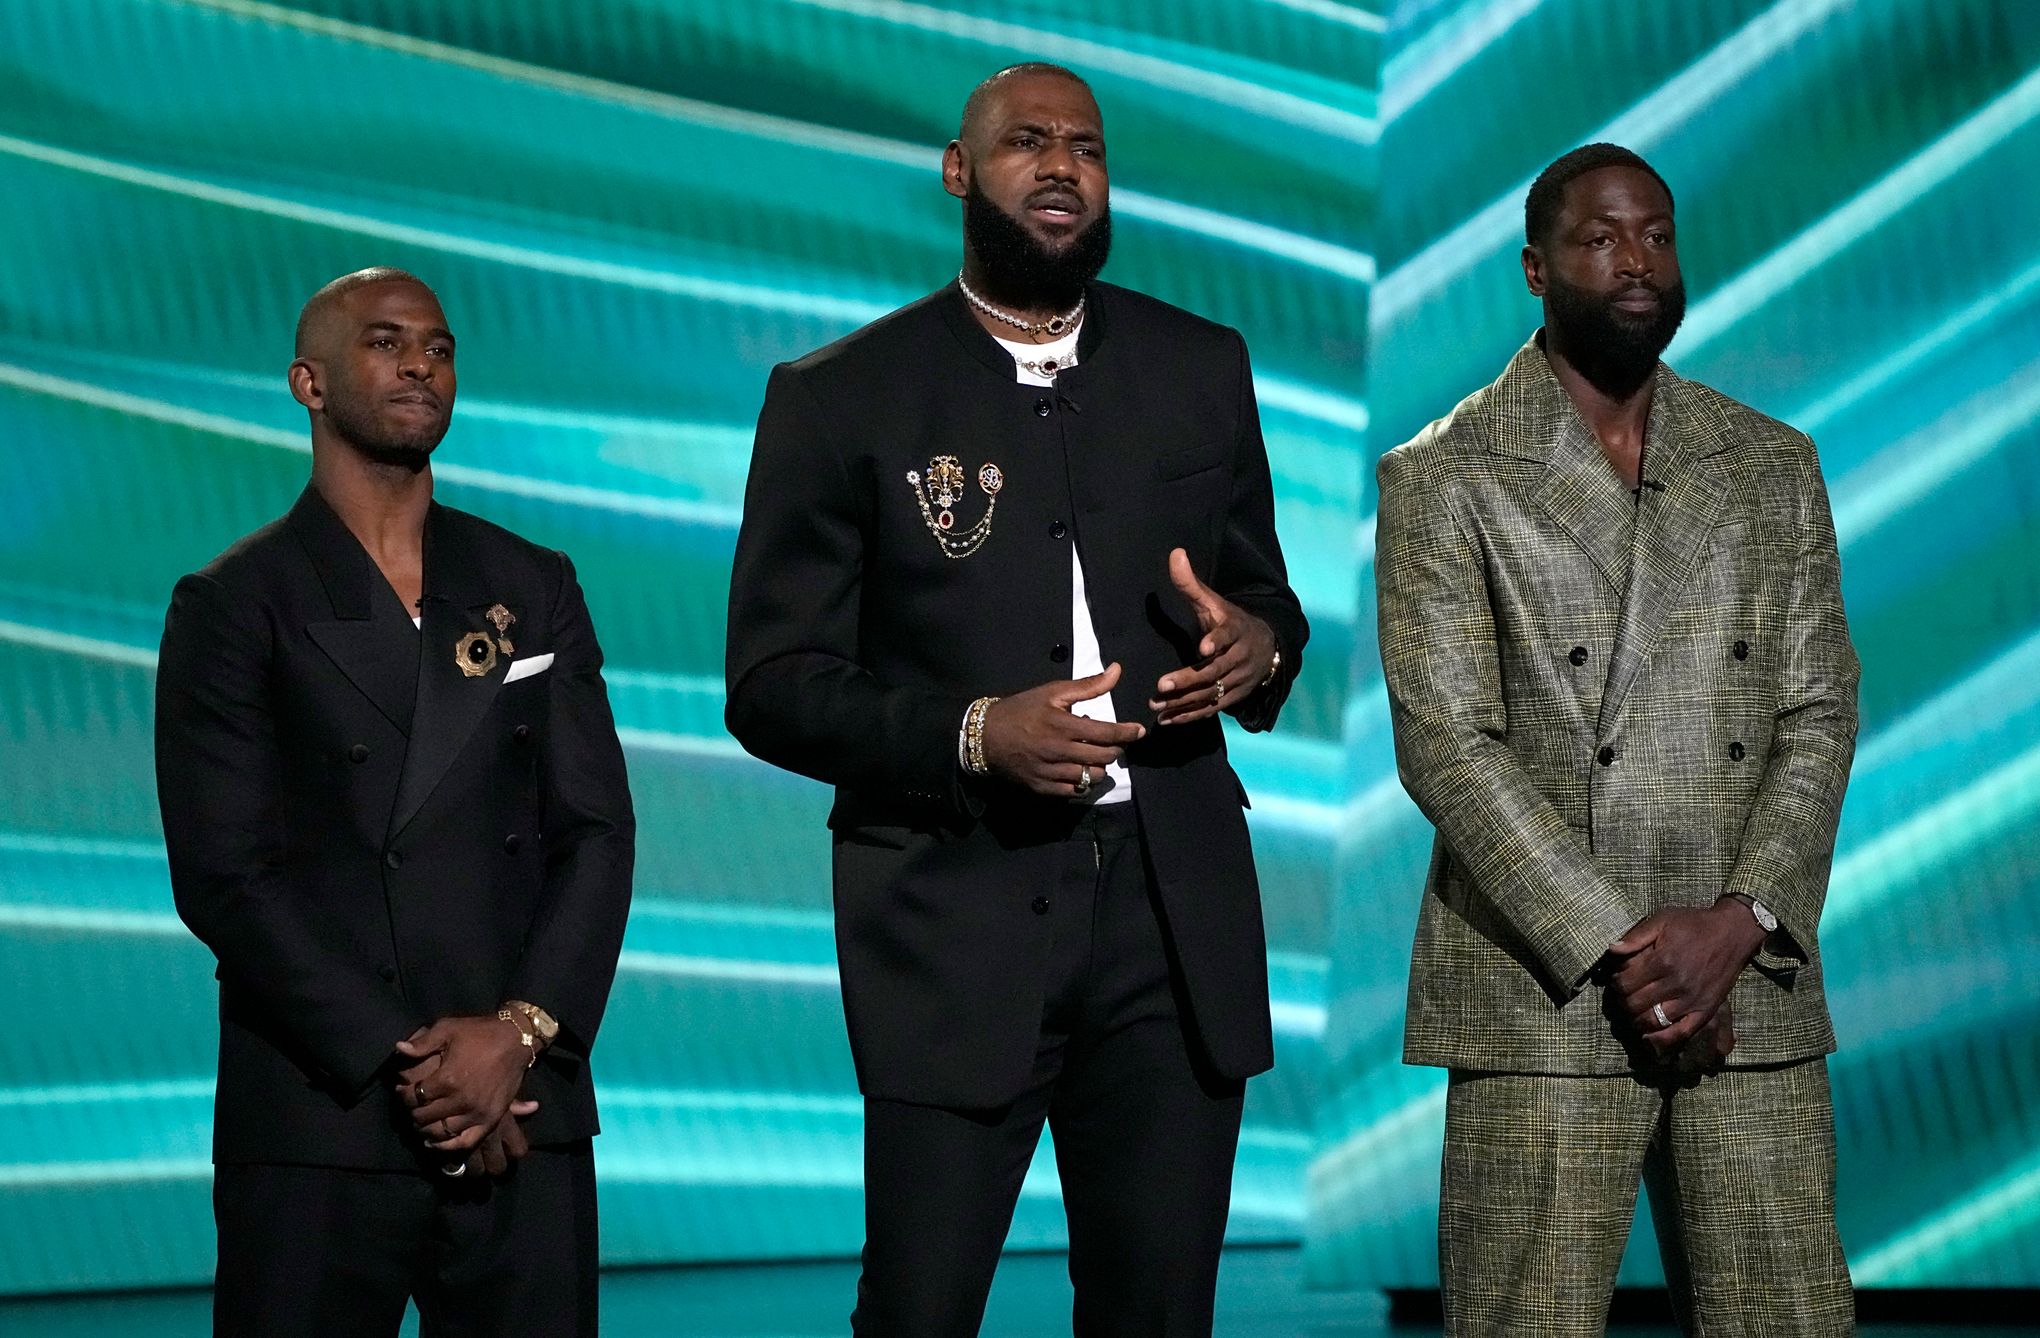 LeBron James will reportedly switch back to No. 6 next season - Silver  Screen and Roll